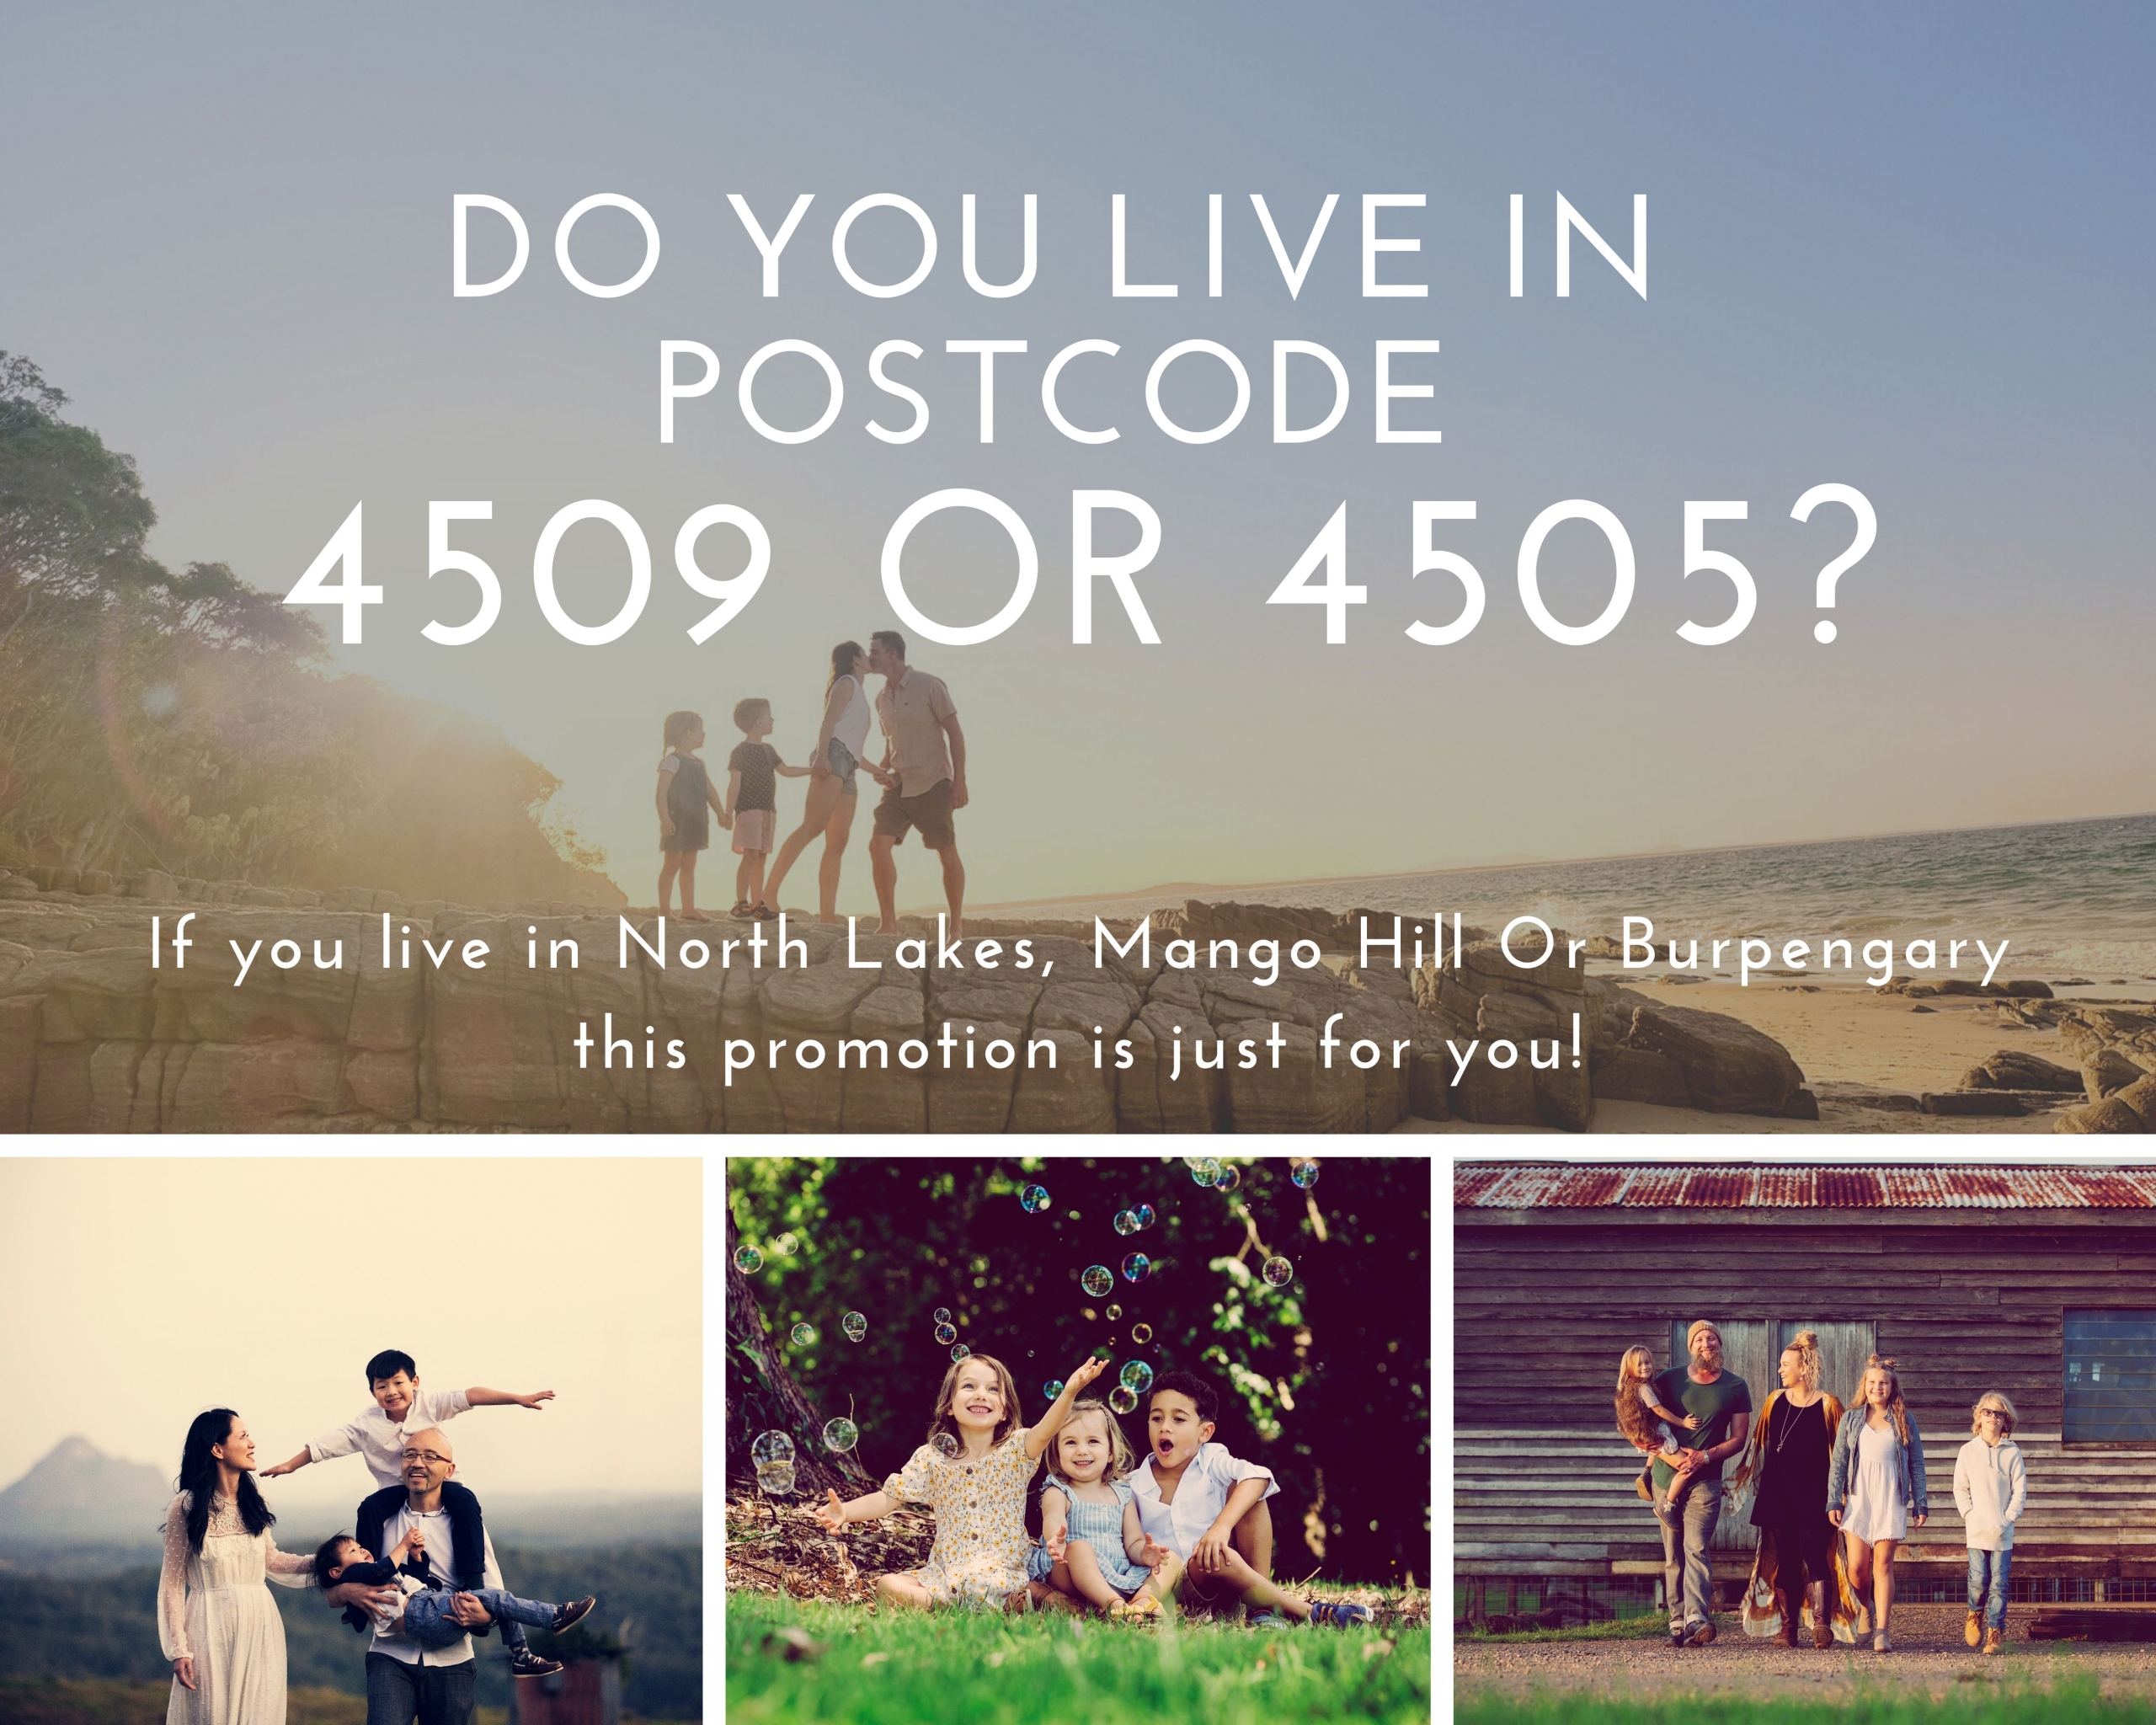 Do you live in Postcode 4509 OR 4505?